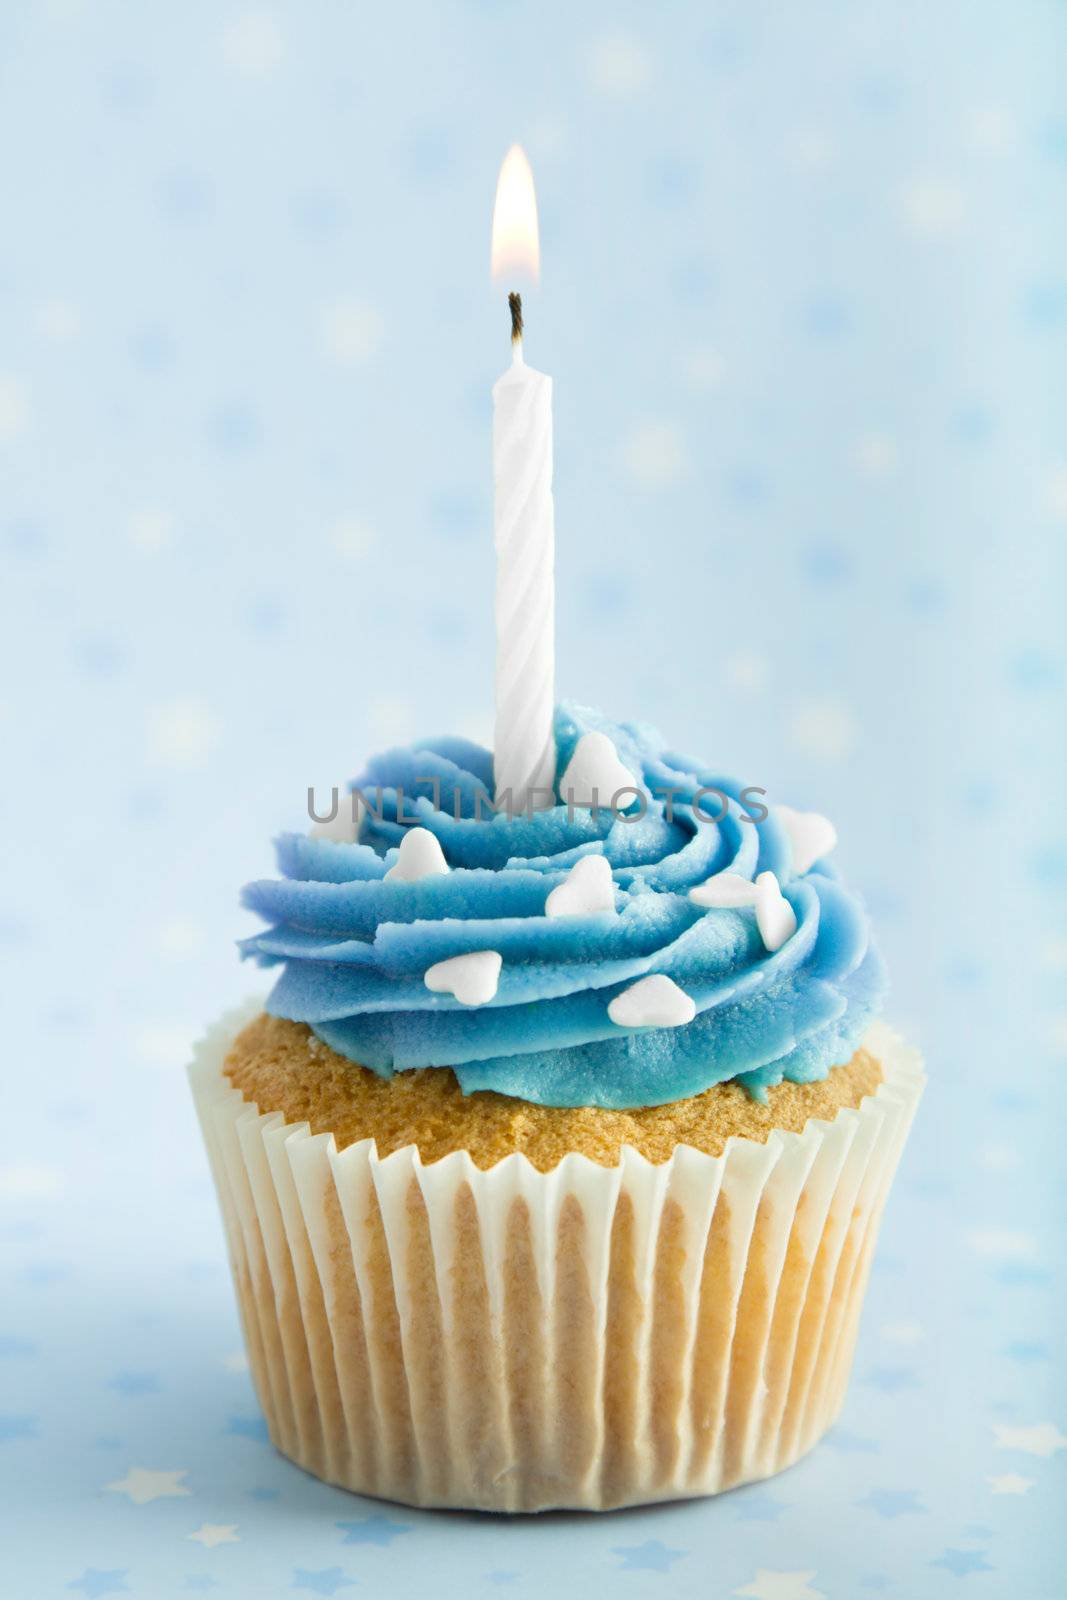 Cupcake decorated with blue frosting and a single candle